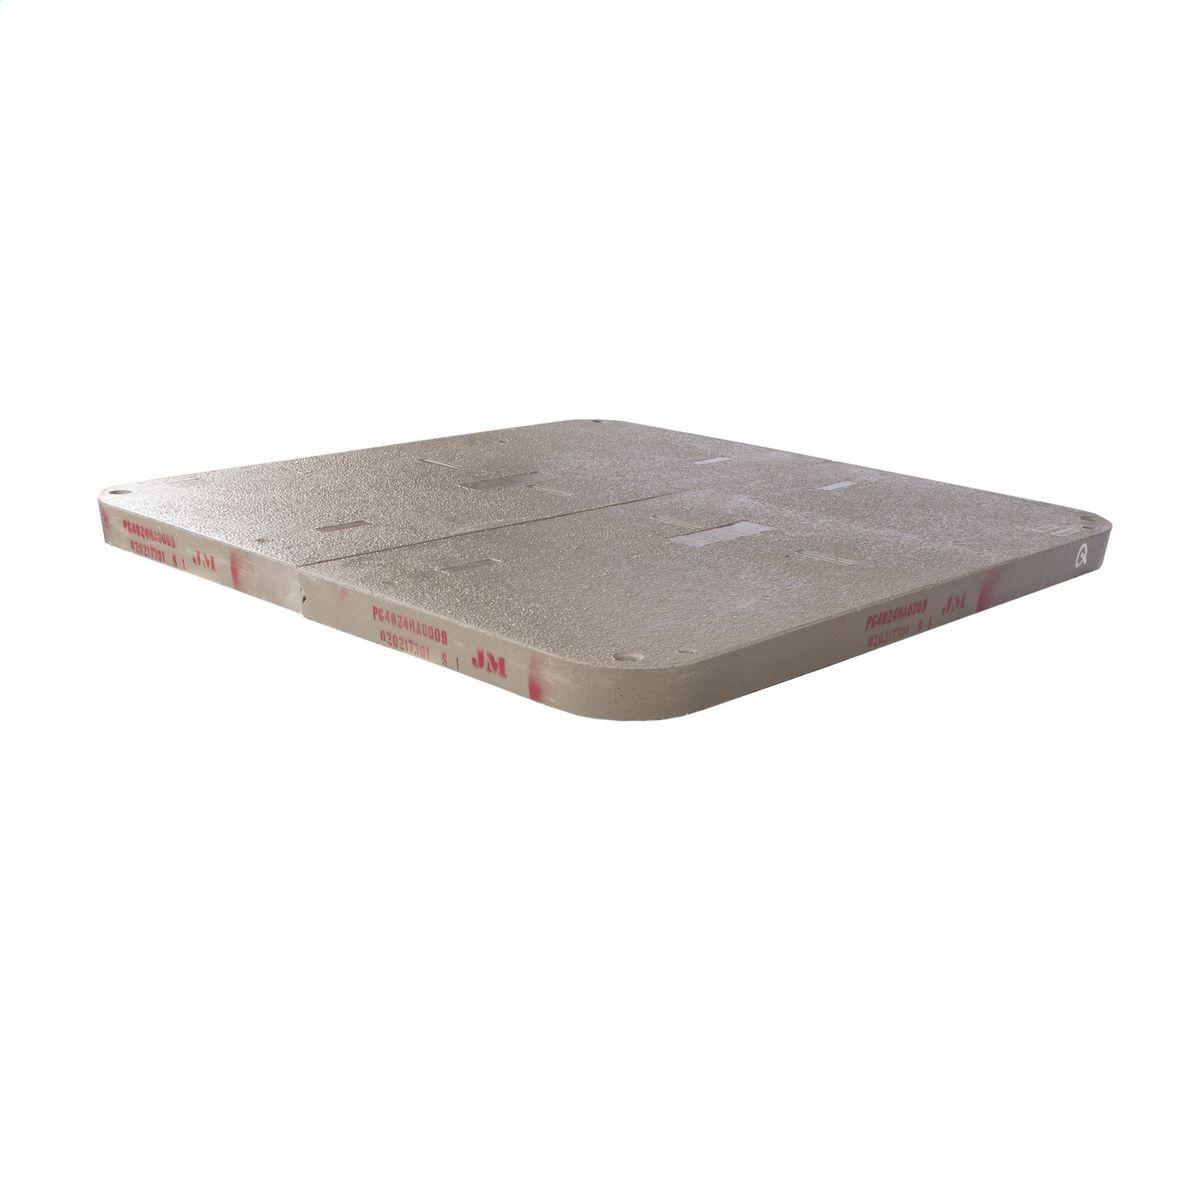 Hubbell PG3660HA0017 Cover, Polymer Concrete, Heavy Duty Tier 15,  36"x60"x3", 2-piece w/2 Bolts, Electric Logo 